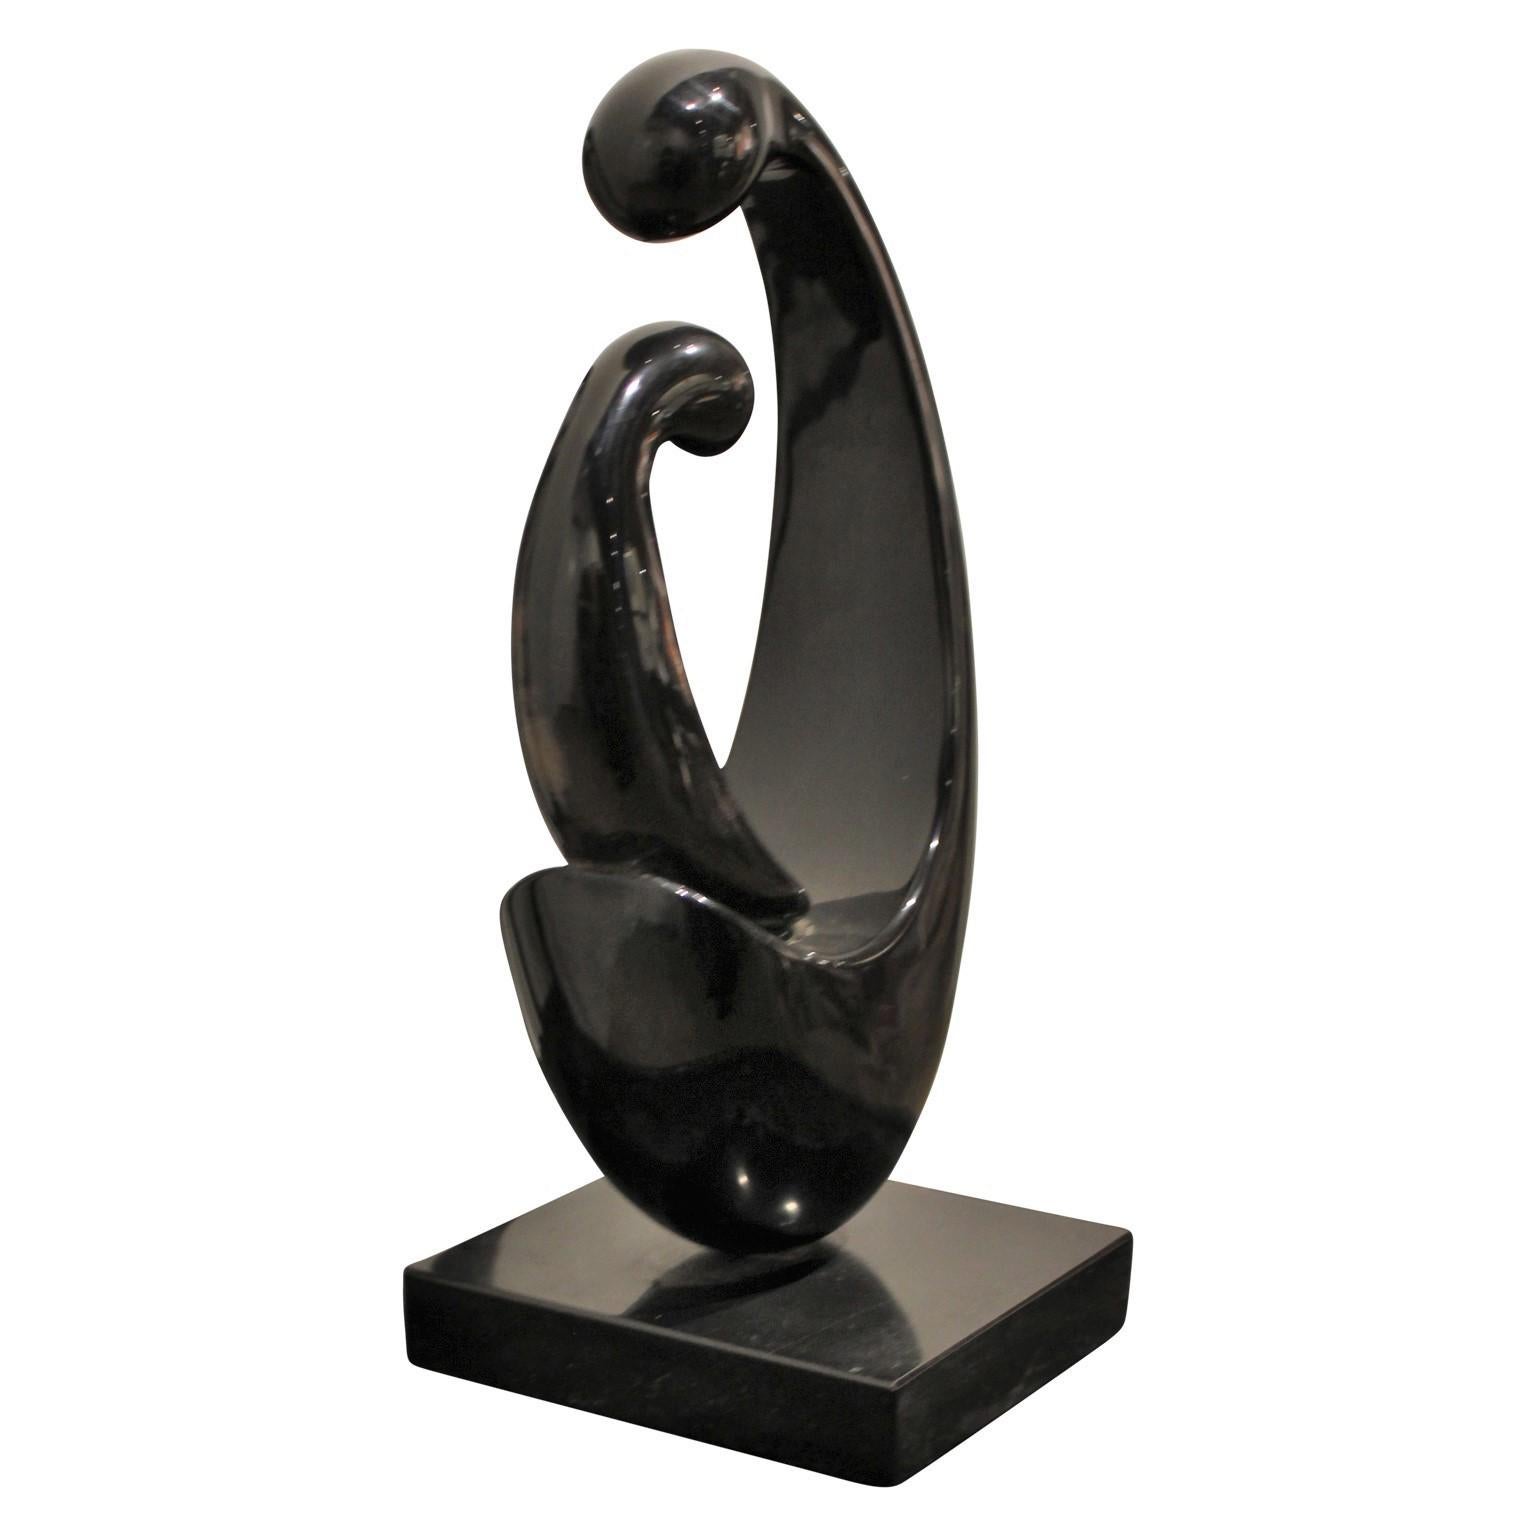 Black marble figurative sculpture of two figures. One appears to be a smaller figure sitting in the lap of the larger one. Sculpture sits on a matching pedestal. 